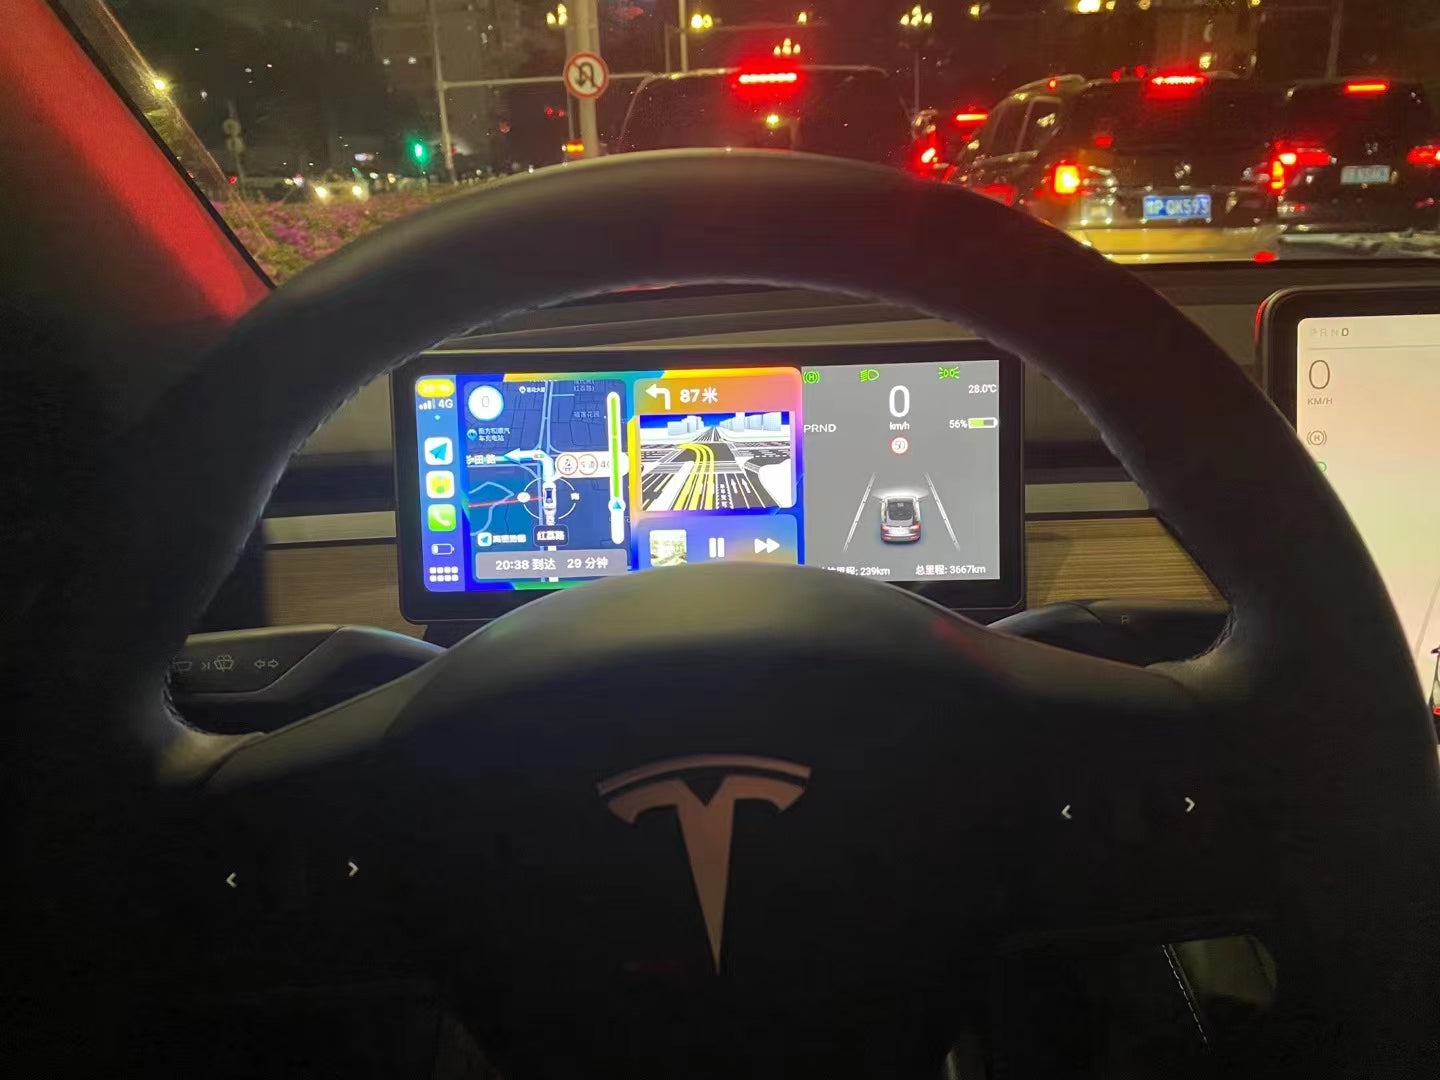 Tesla Model 3 / Y Instrument Cluster Upgrade 10.25 Inch HD Center Console Dashboard CarPlay Touch Screen